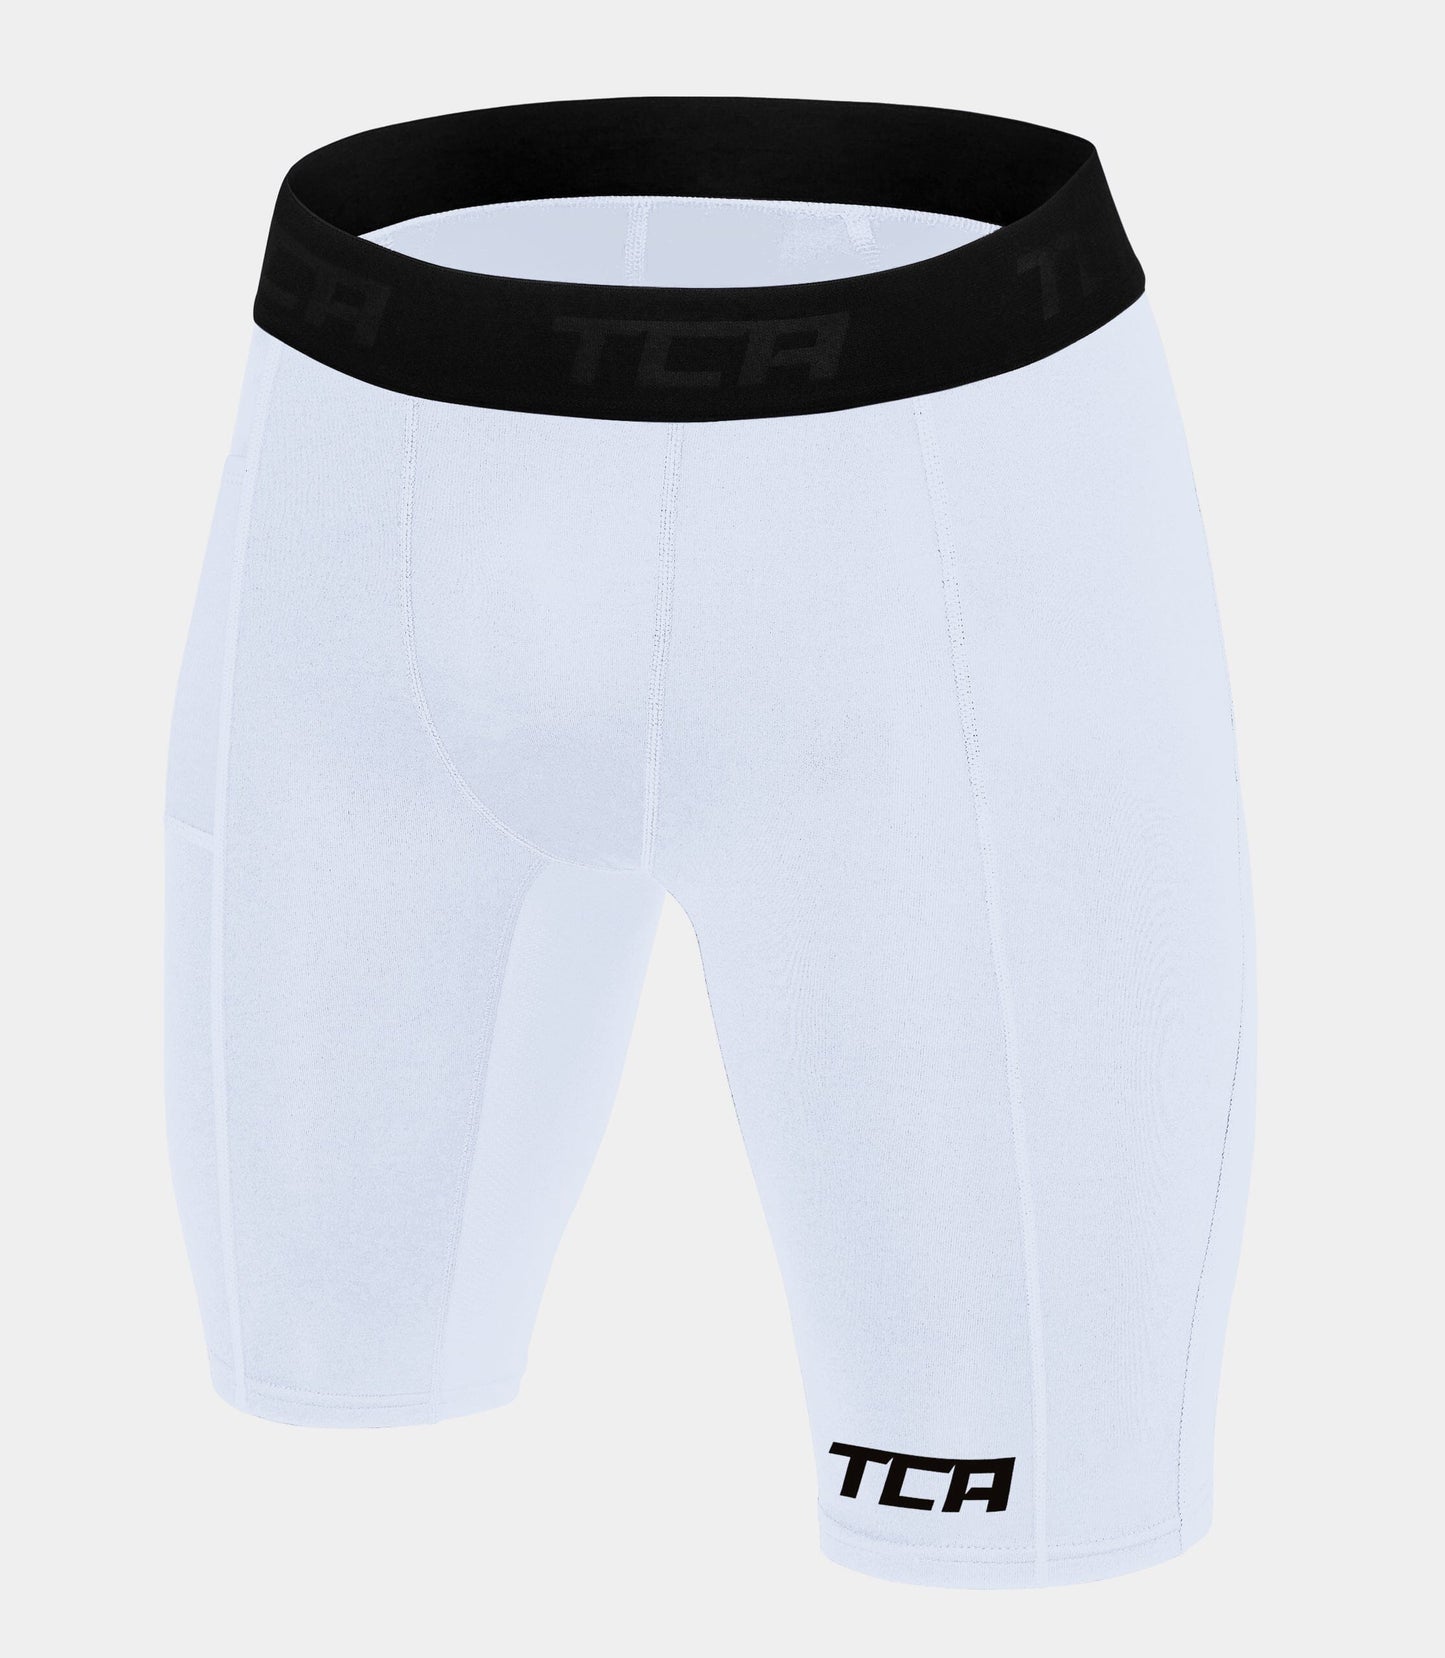 SuperThermal Compression Base Layer Shorts For Men With Brushed Inner Fabric